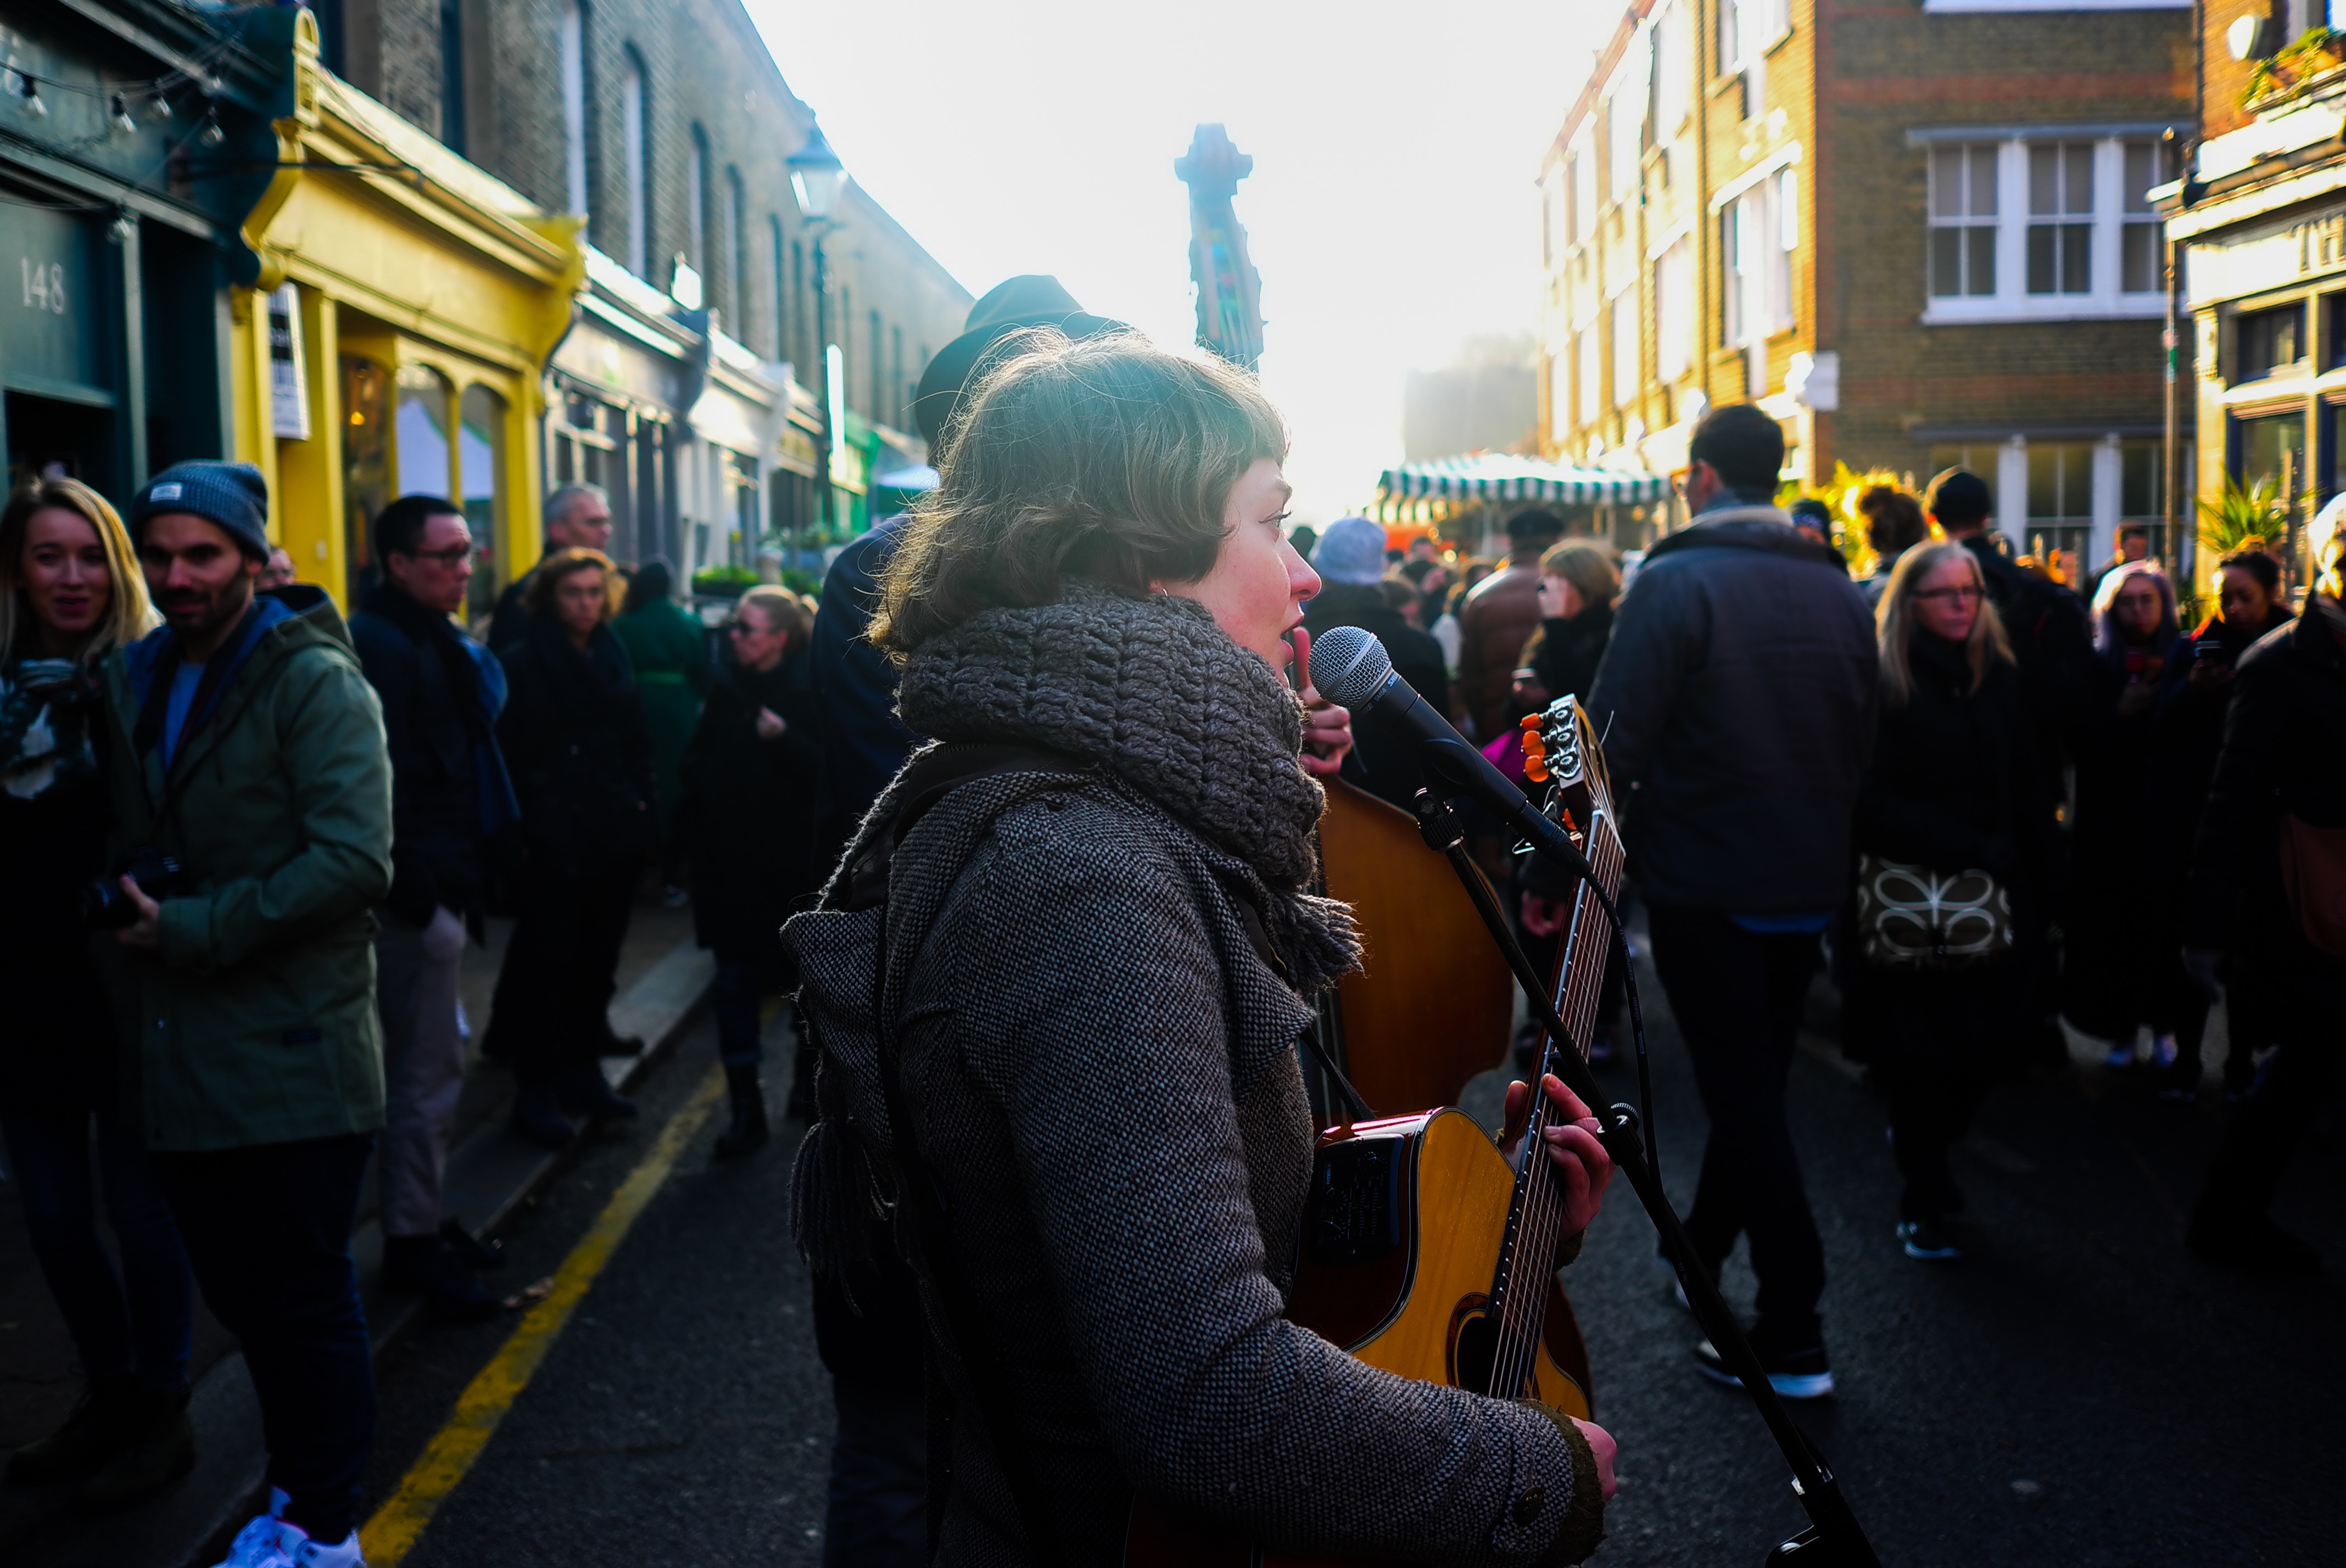 A woman stands outside in the cold, singing and performing music for a crowd of shoppers and revelers.